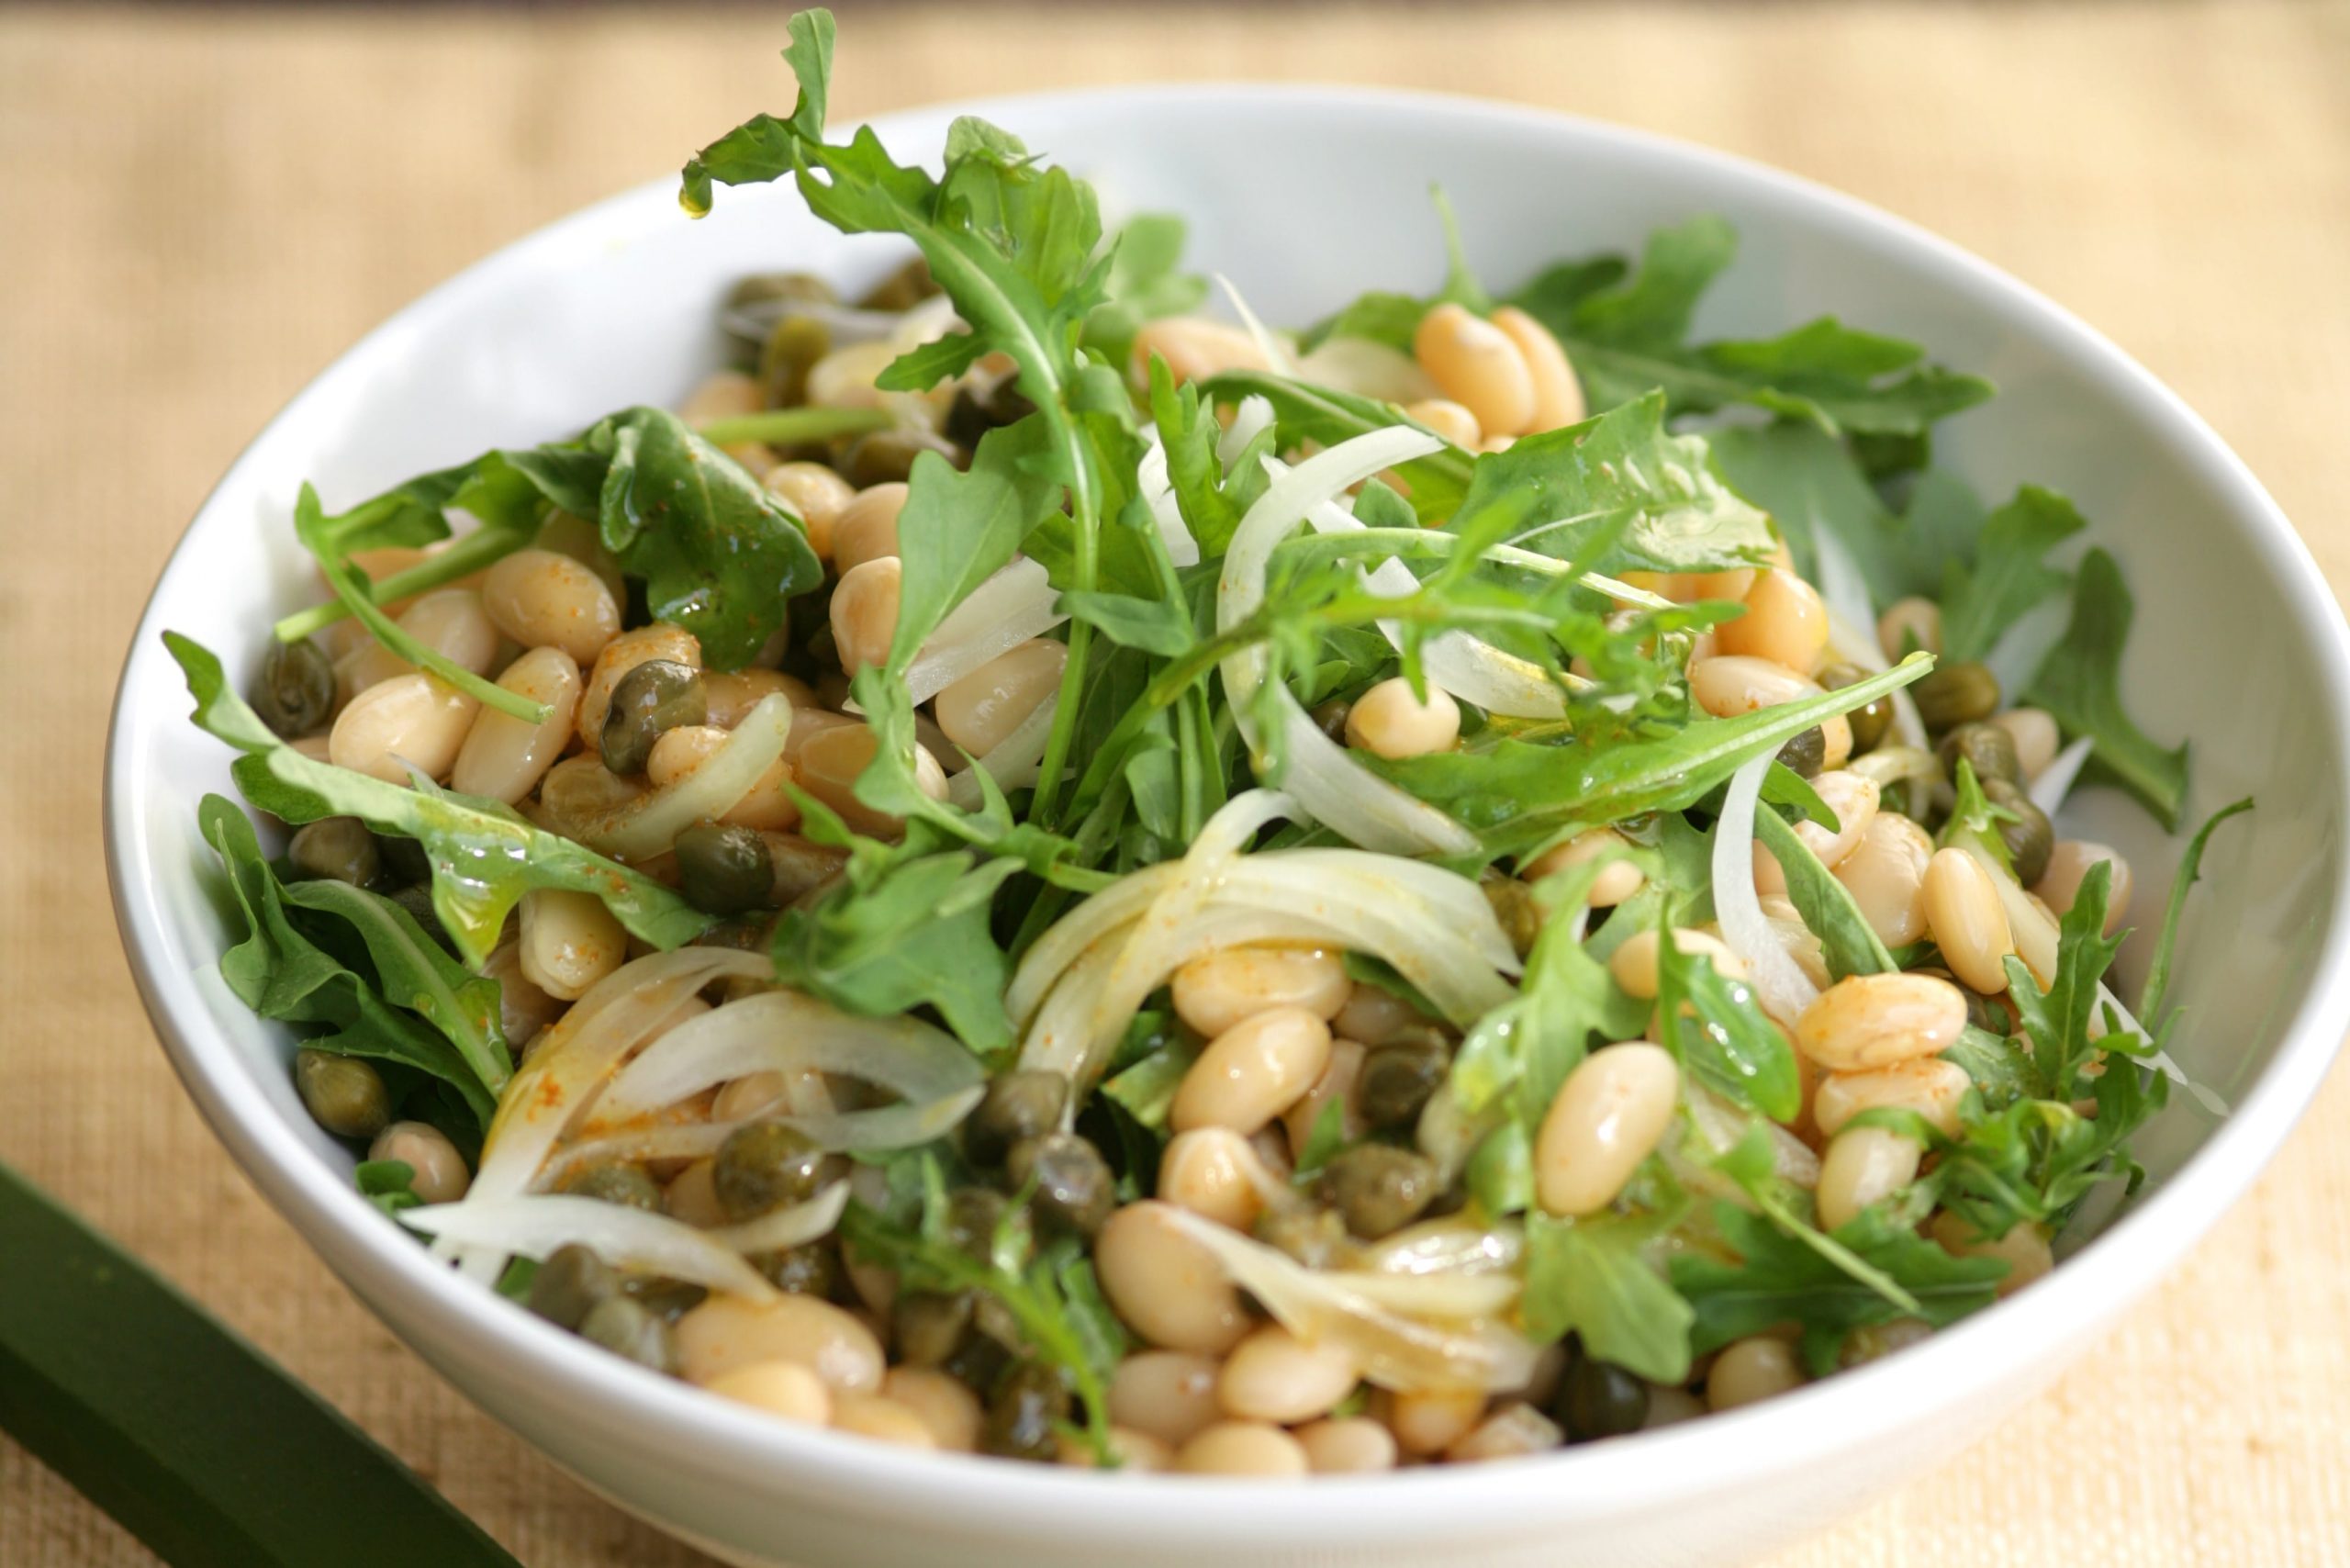 Sausage and White Bean Cassoulet with Arugula Salad